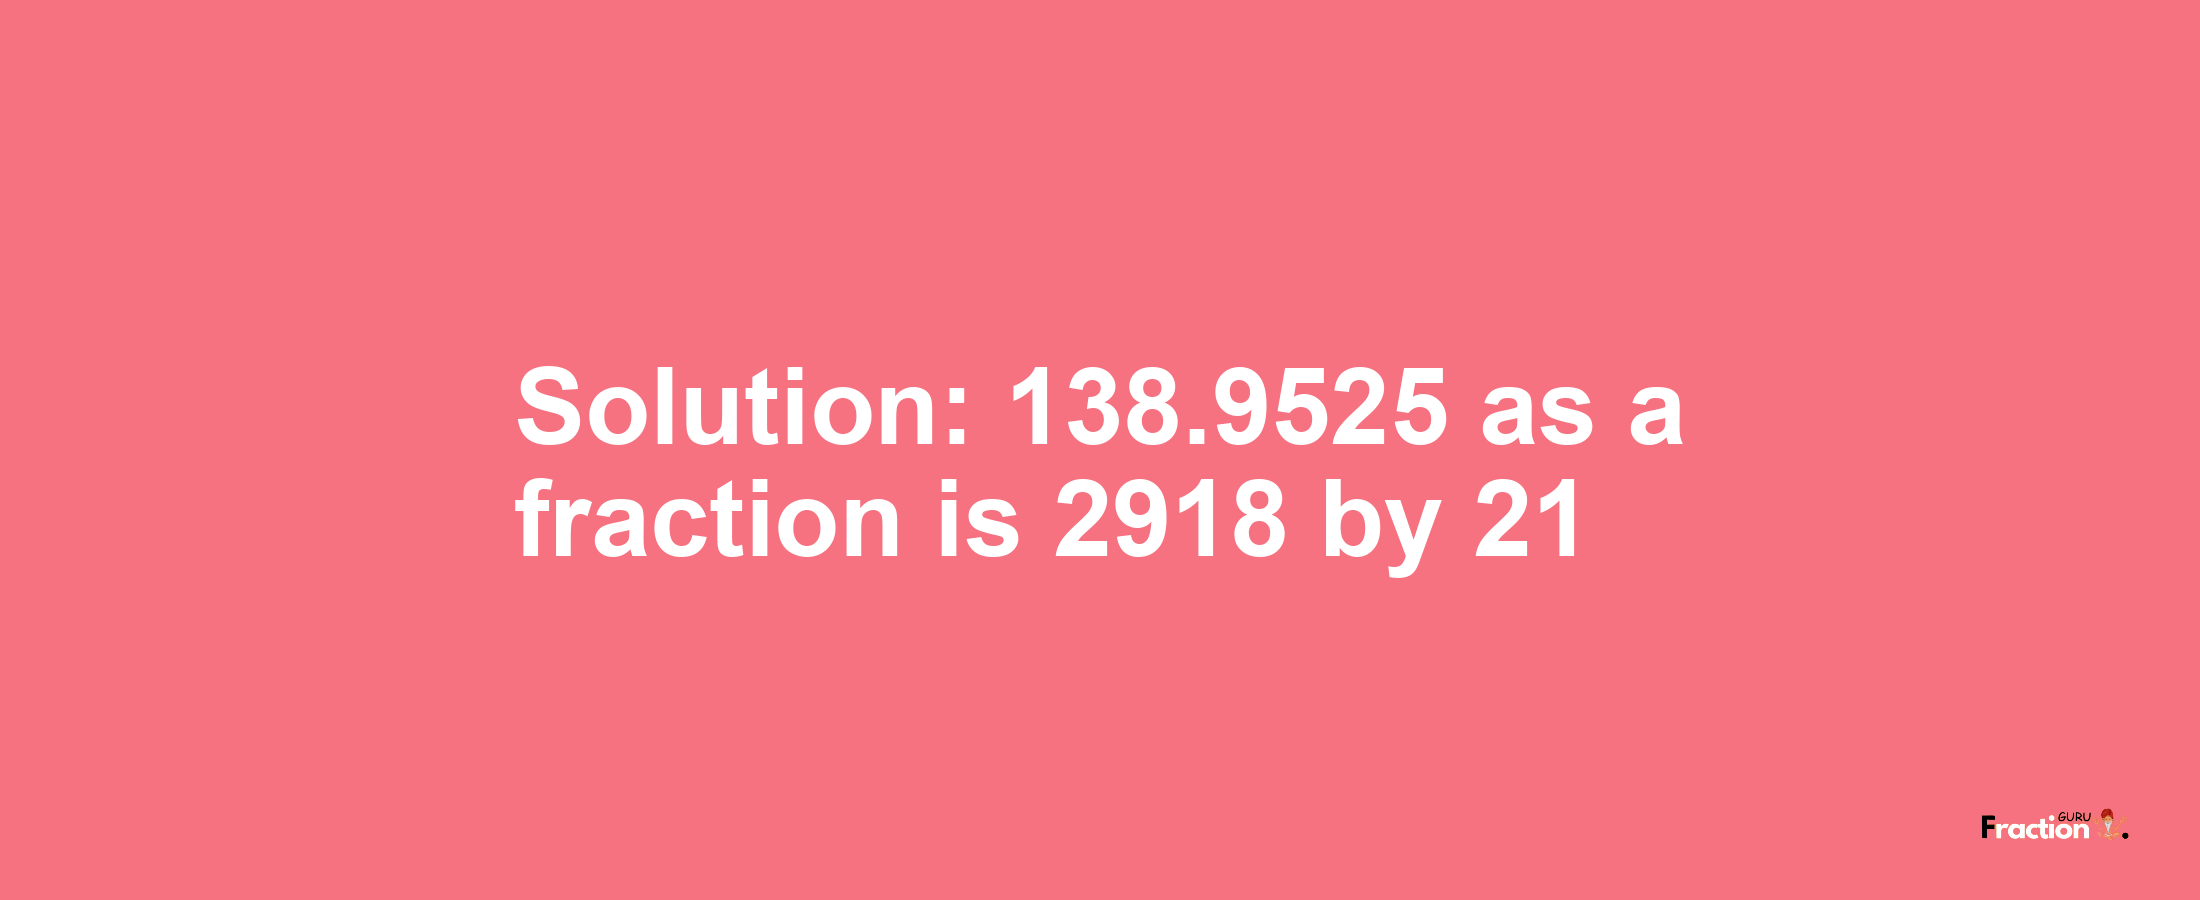 Solution:138.9525 as a fraction is 2918/21